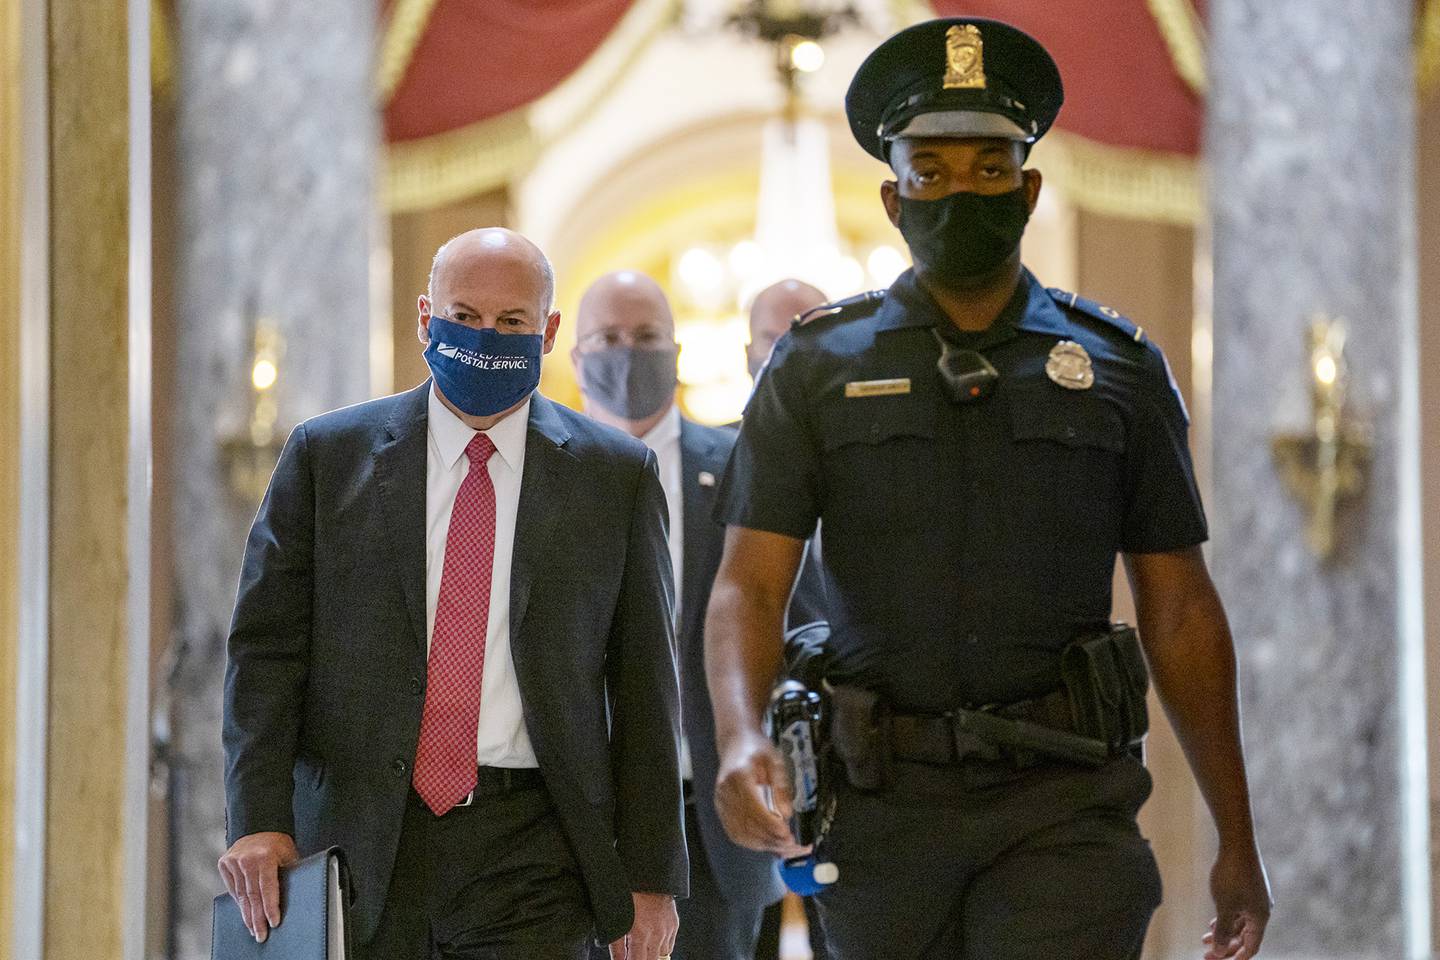 Postmaster General Louis DeJoy, left, is escorted to House Speaker Nancy Pelosi's office on Capitol Hill in Washington, Wednesday, Aug. 5, 2020.